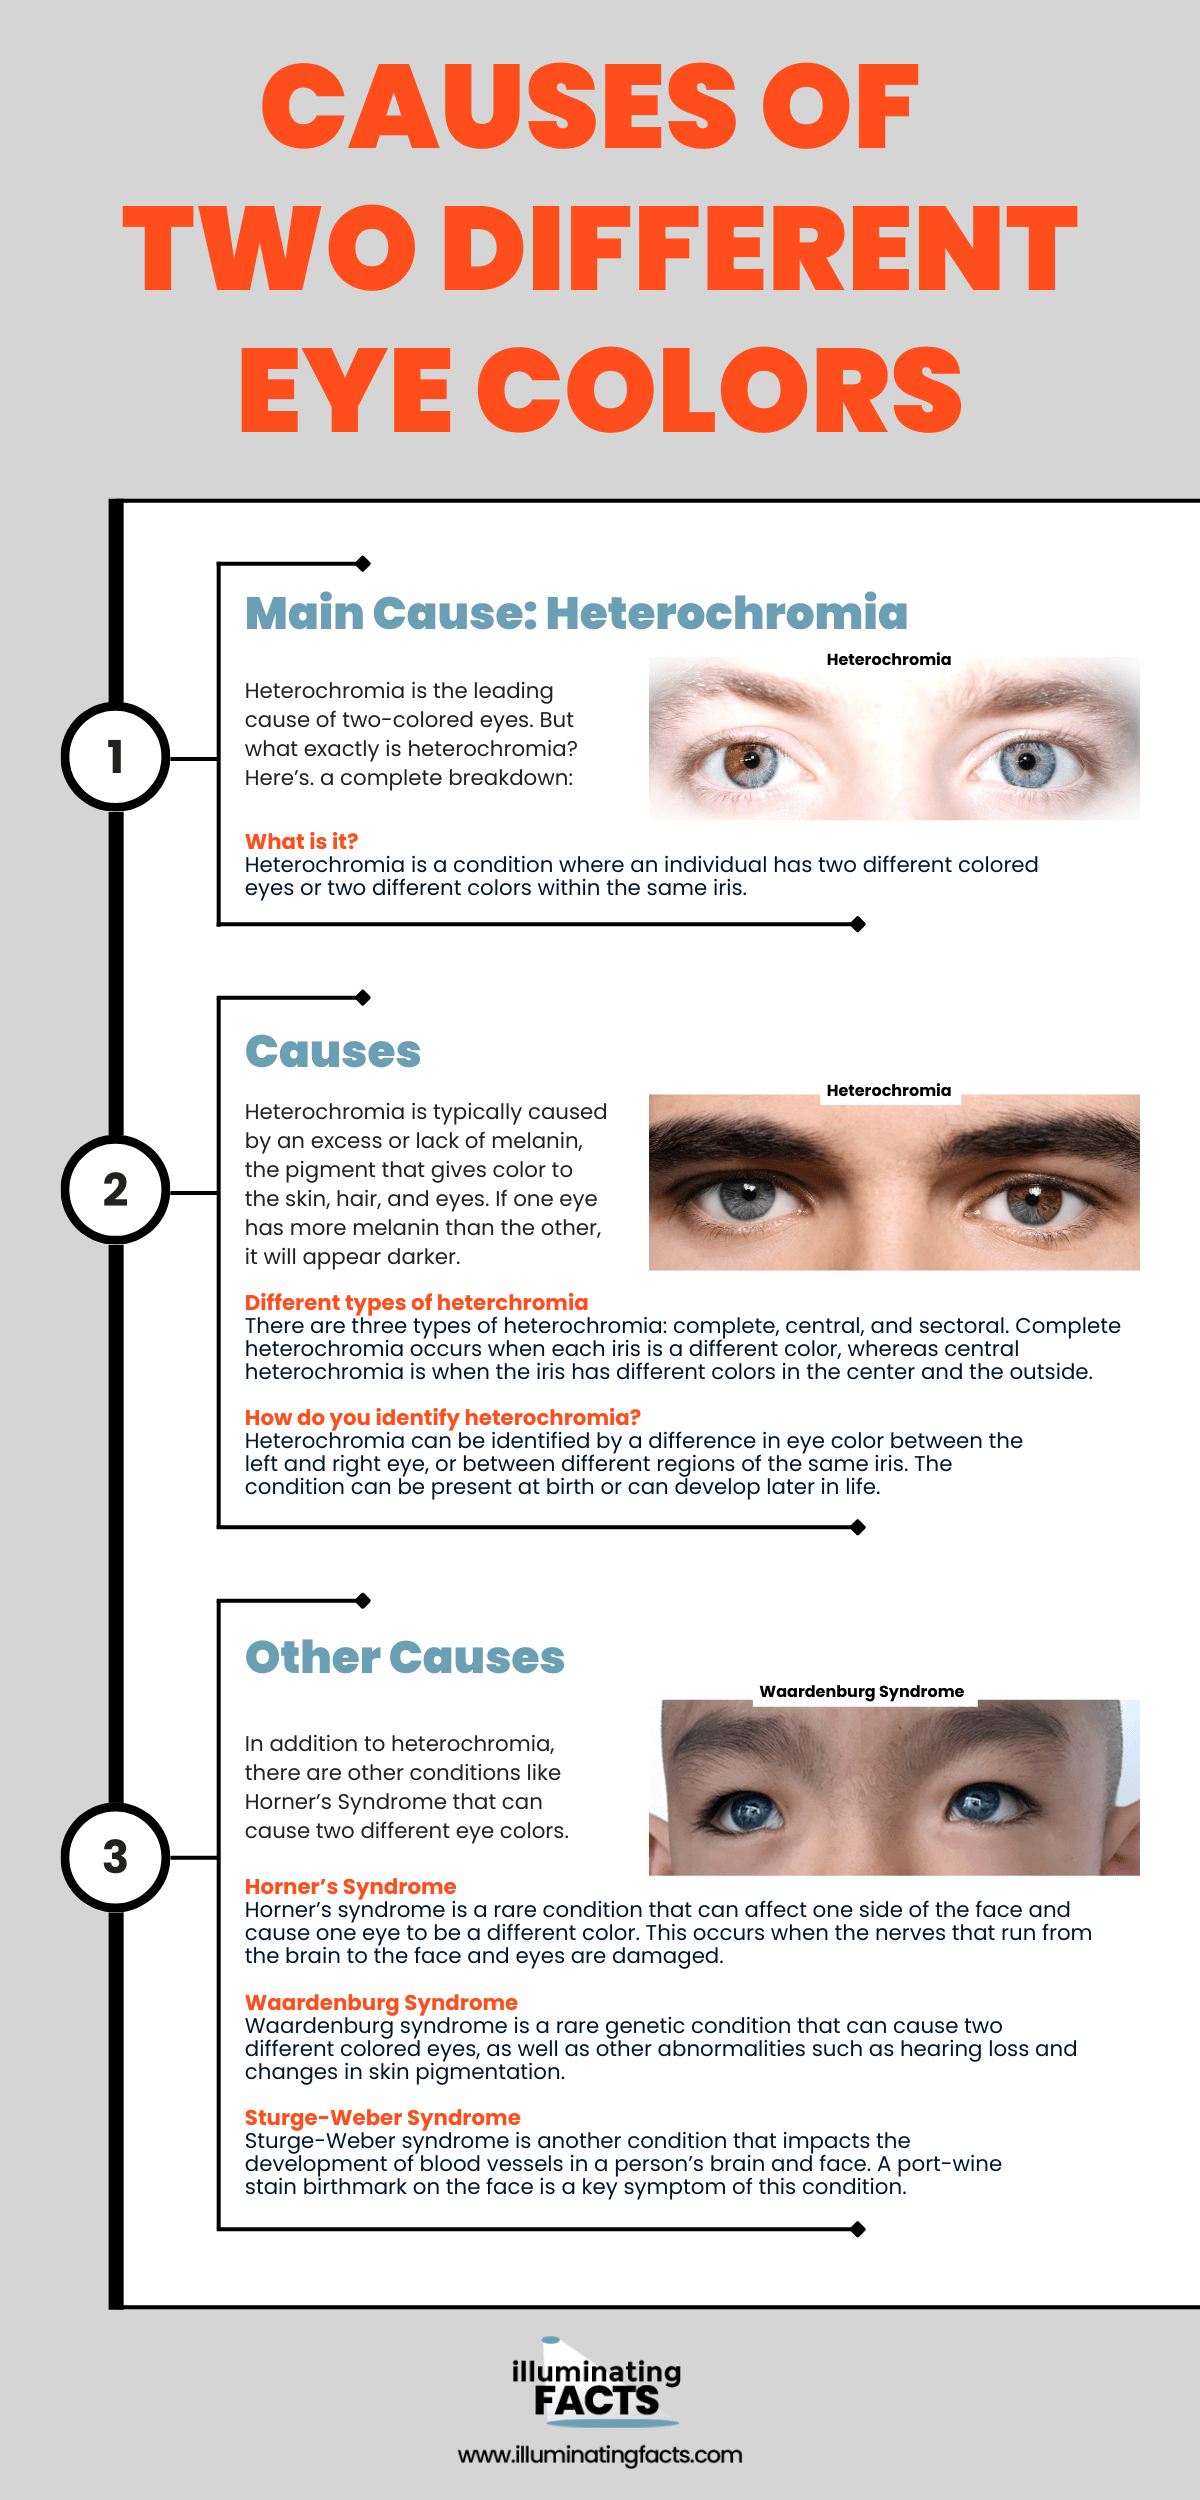 Causes of Two Different Eye Colors